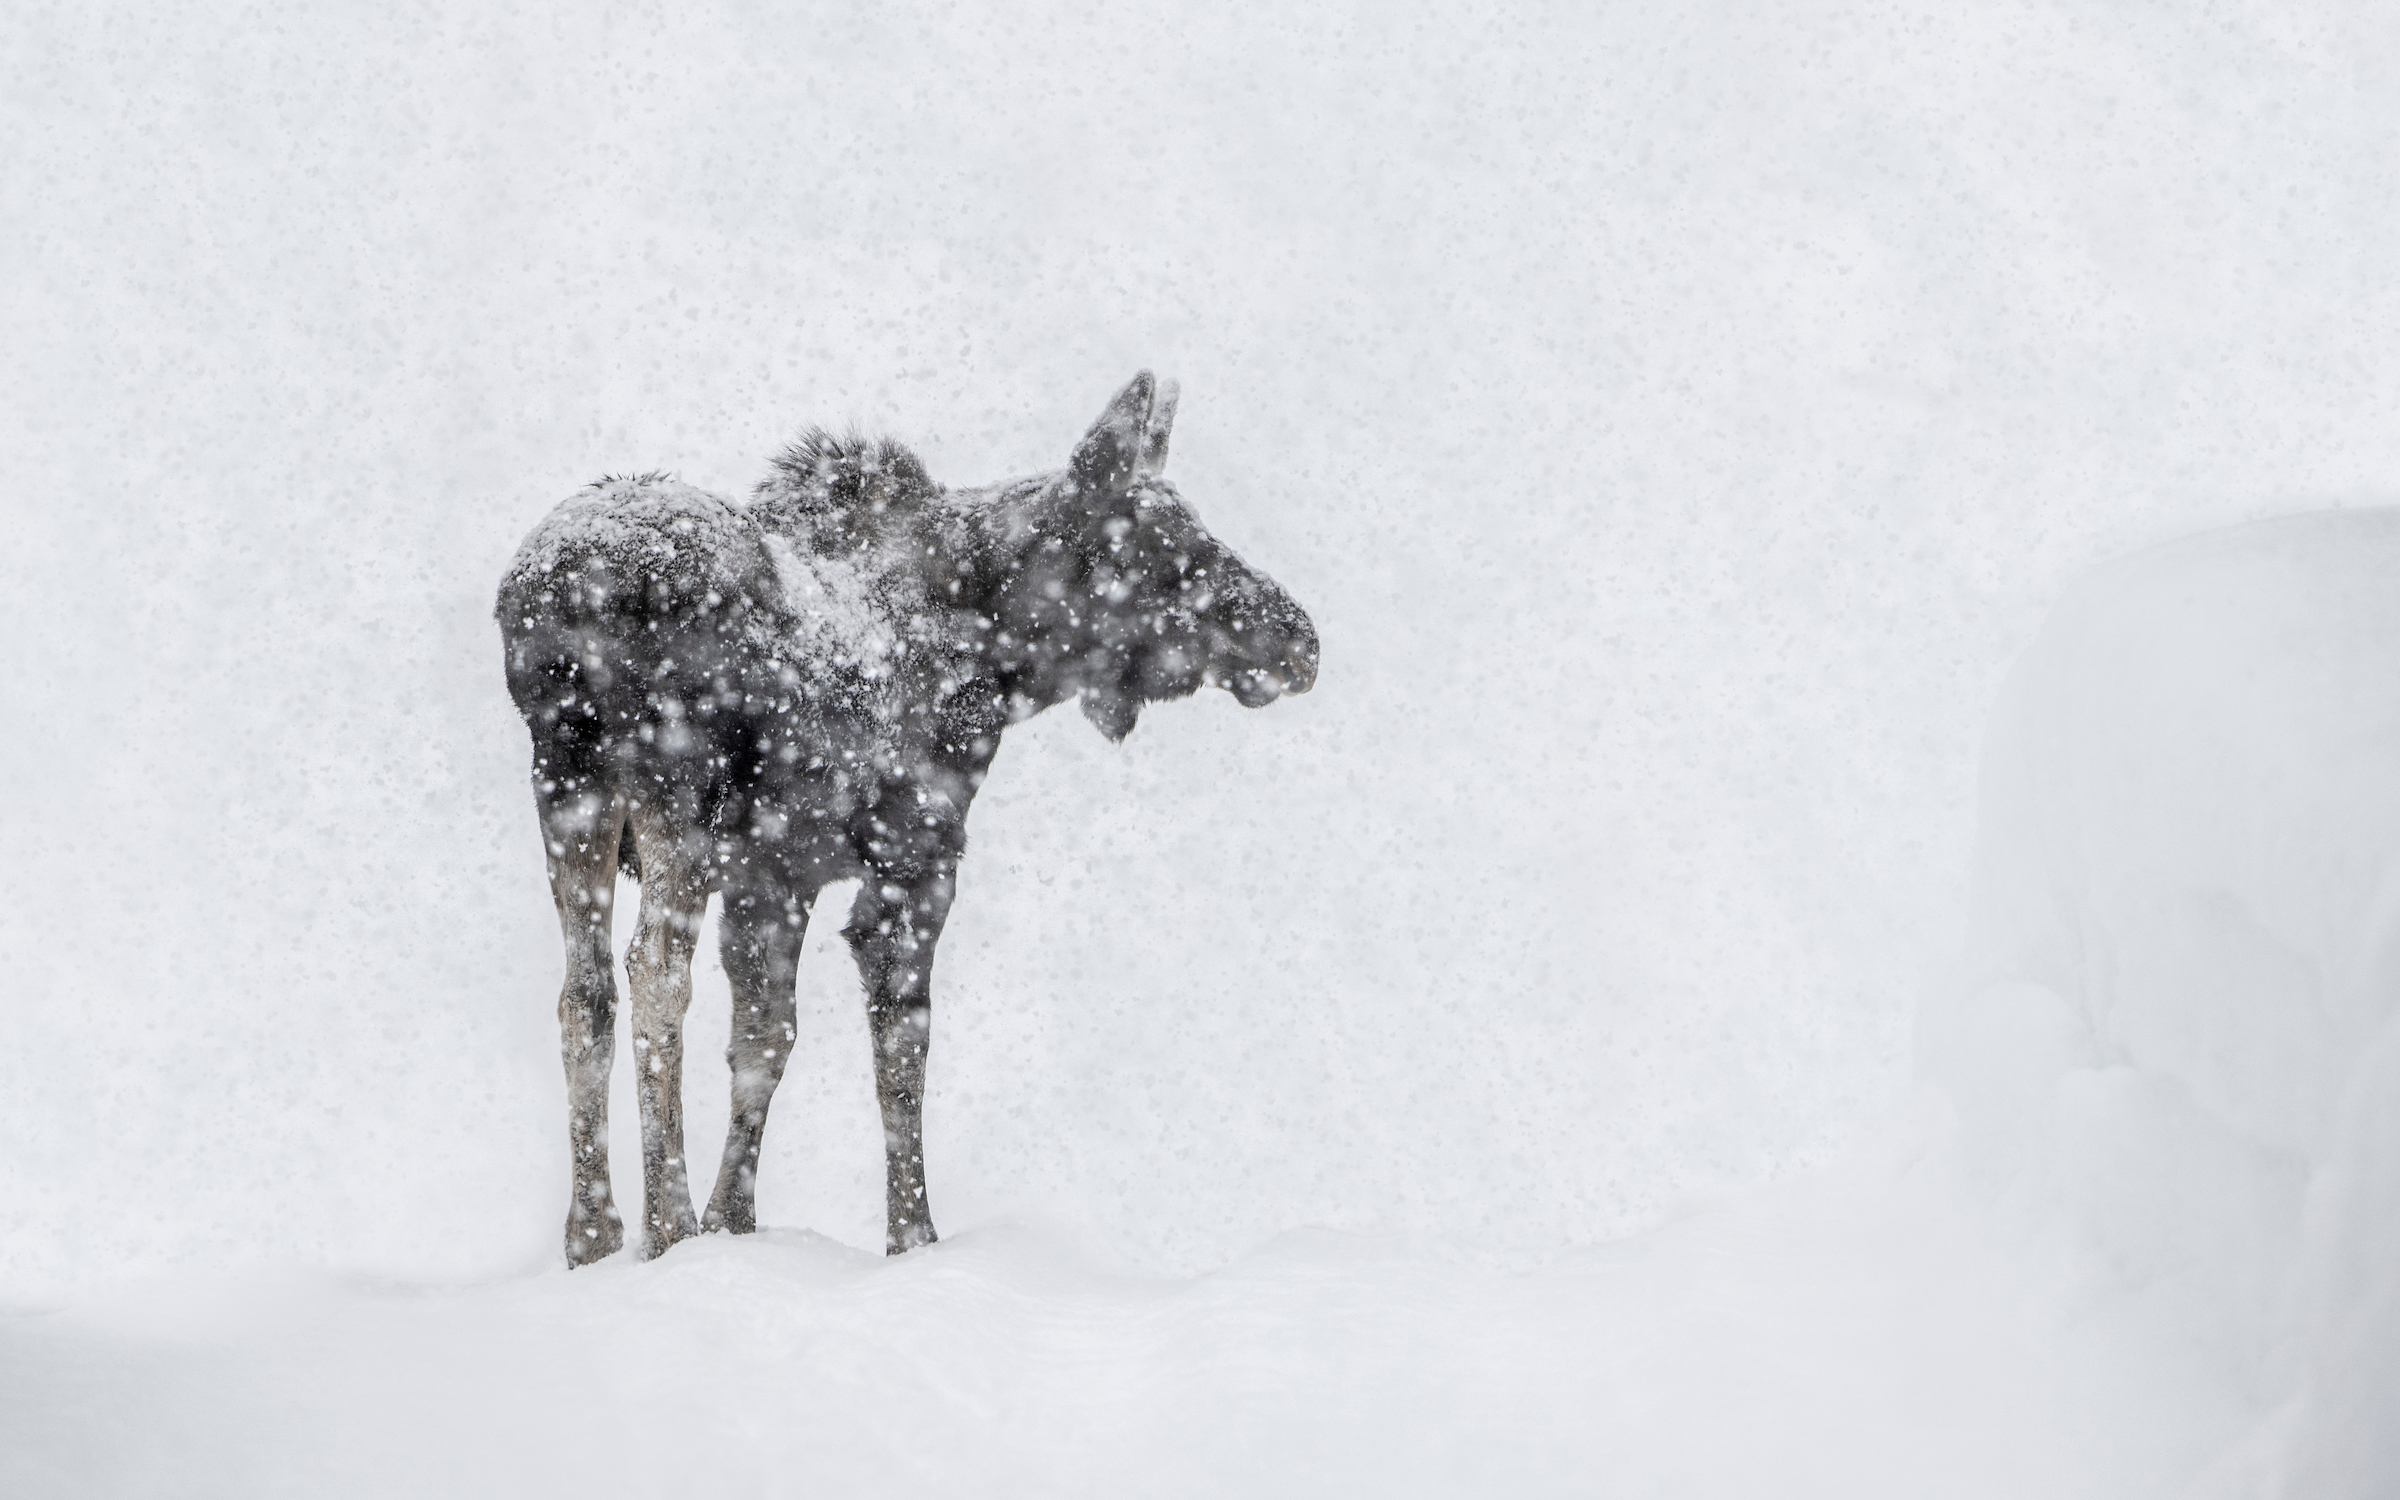 moose stands partly obscured in a snowstorm